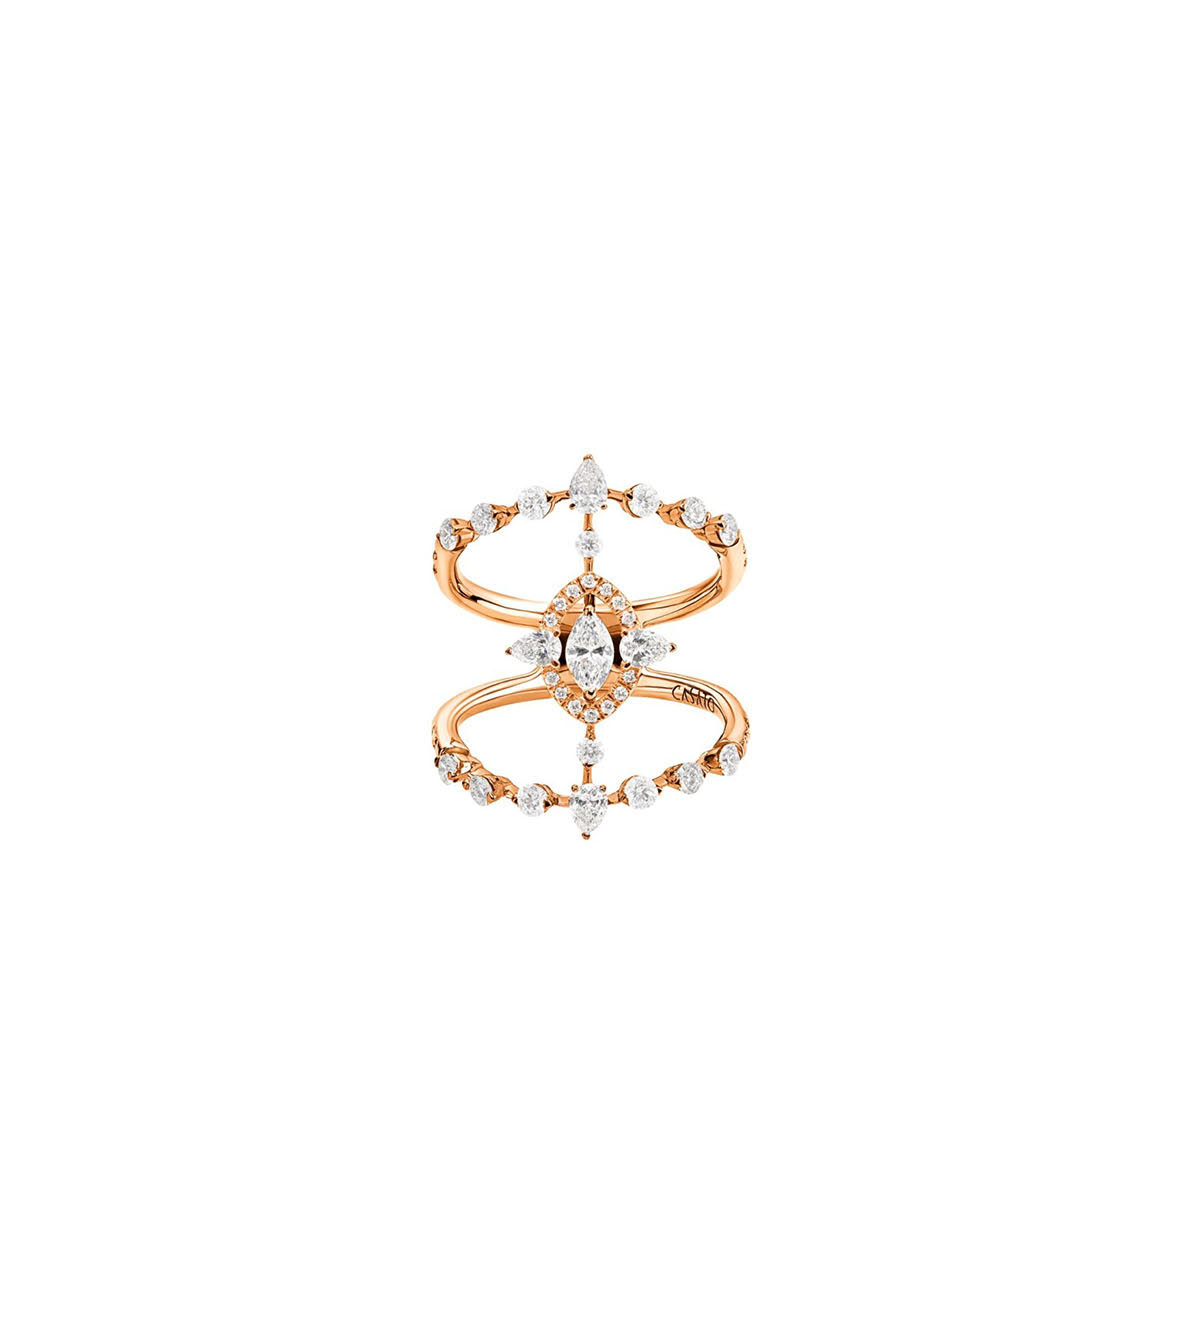 Rock Marquise Band Ring by Casato MX-1304BT-P